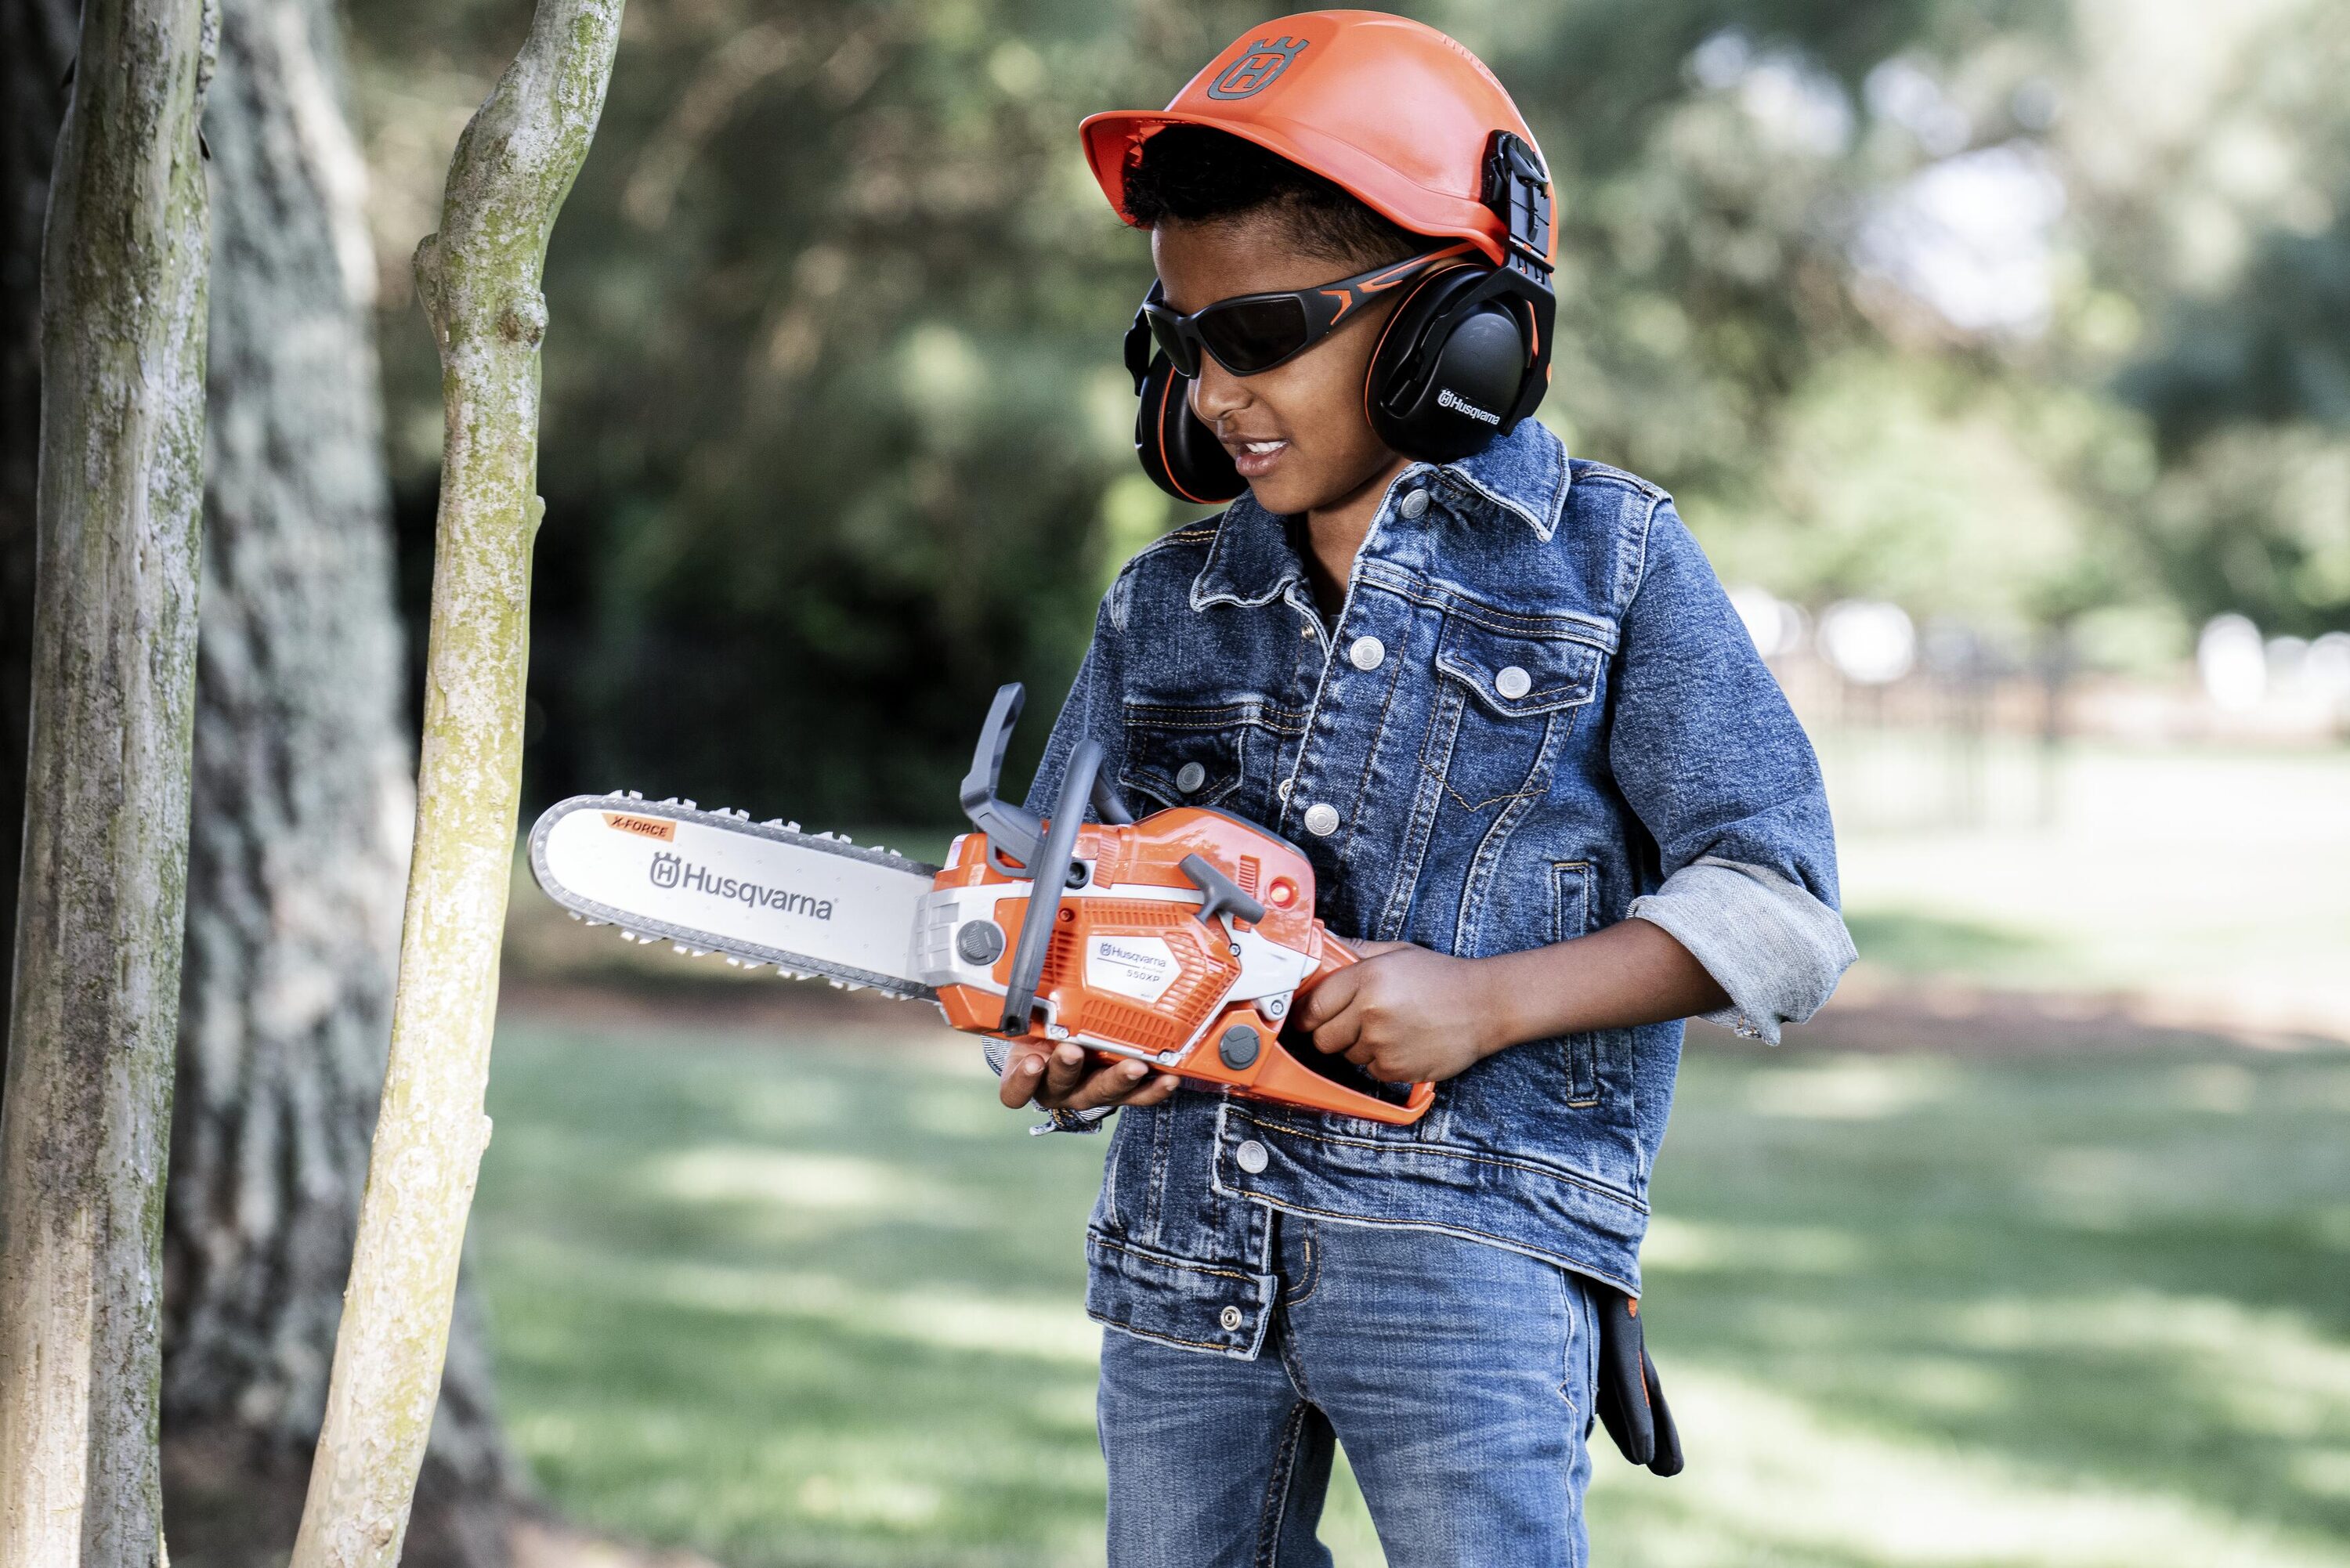 Kids Tool Set for Boys - Toddler Tool Set with Toy Chainsaw